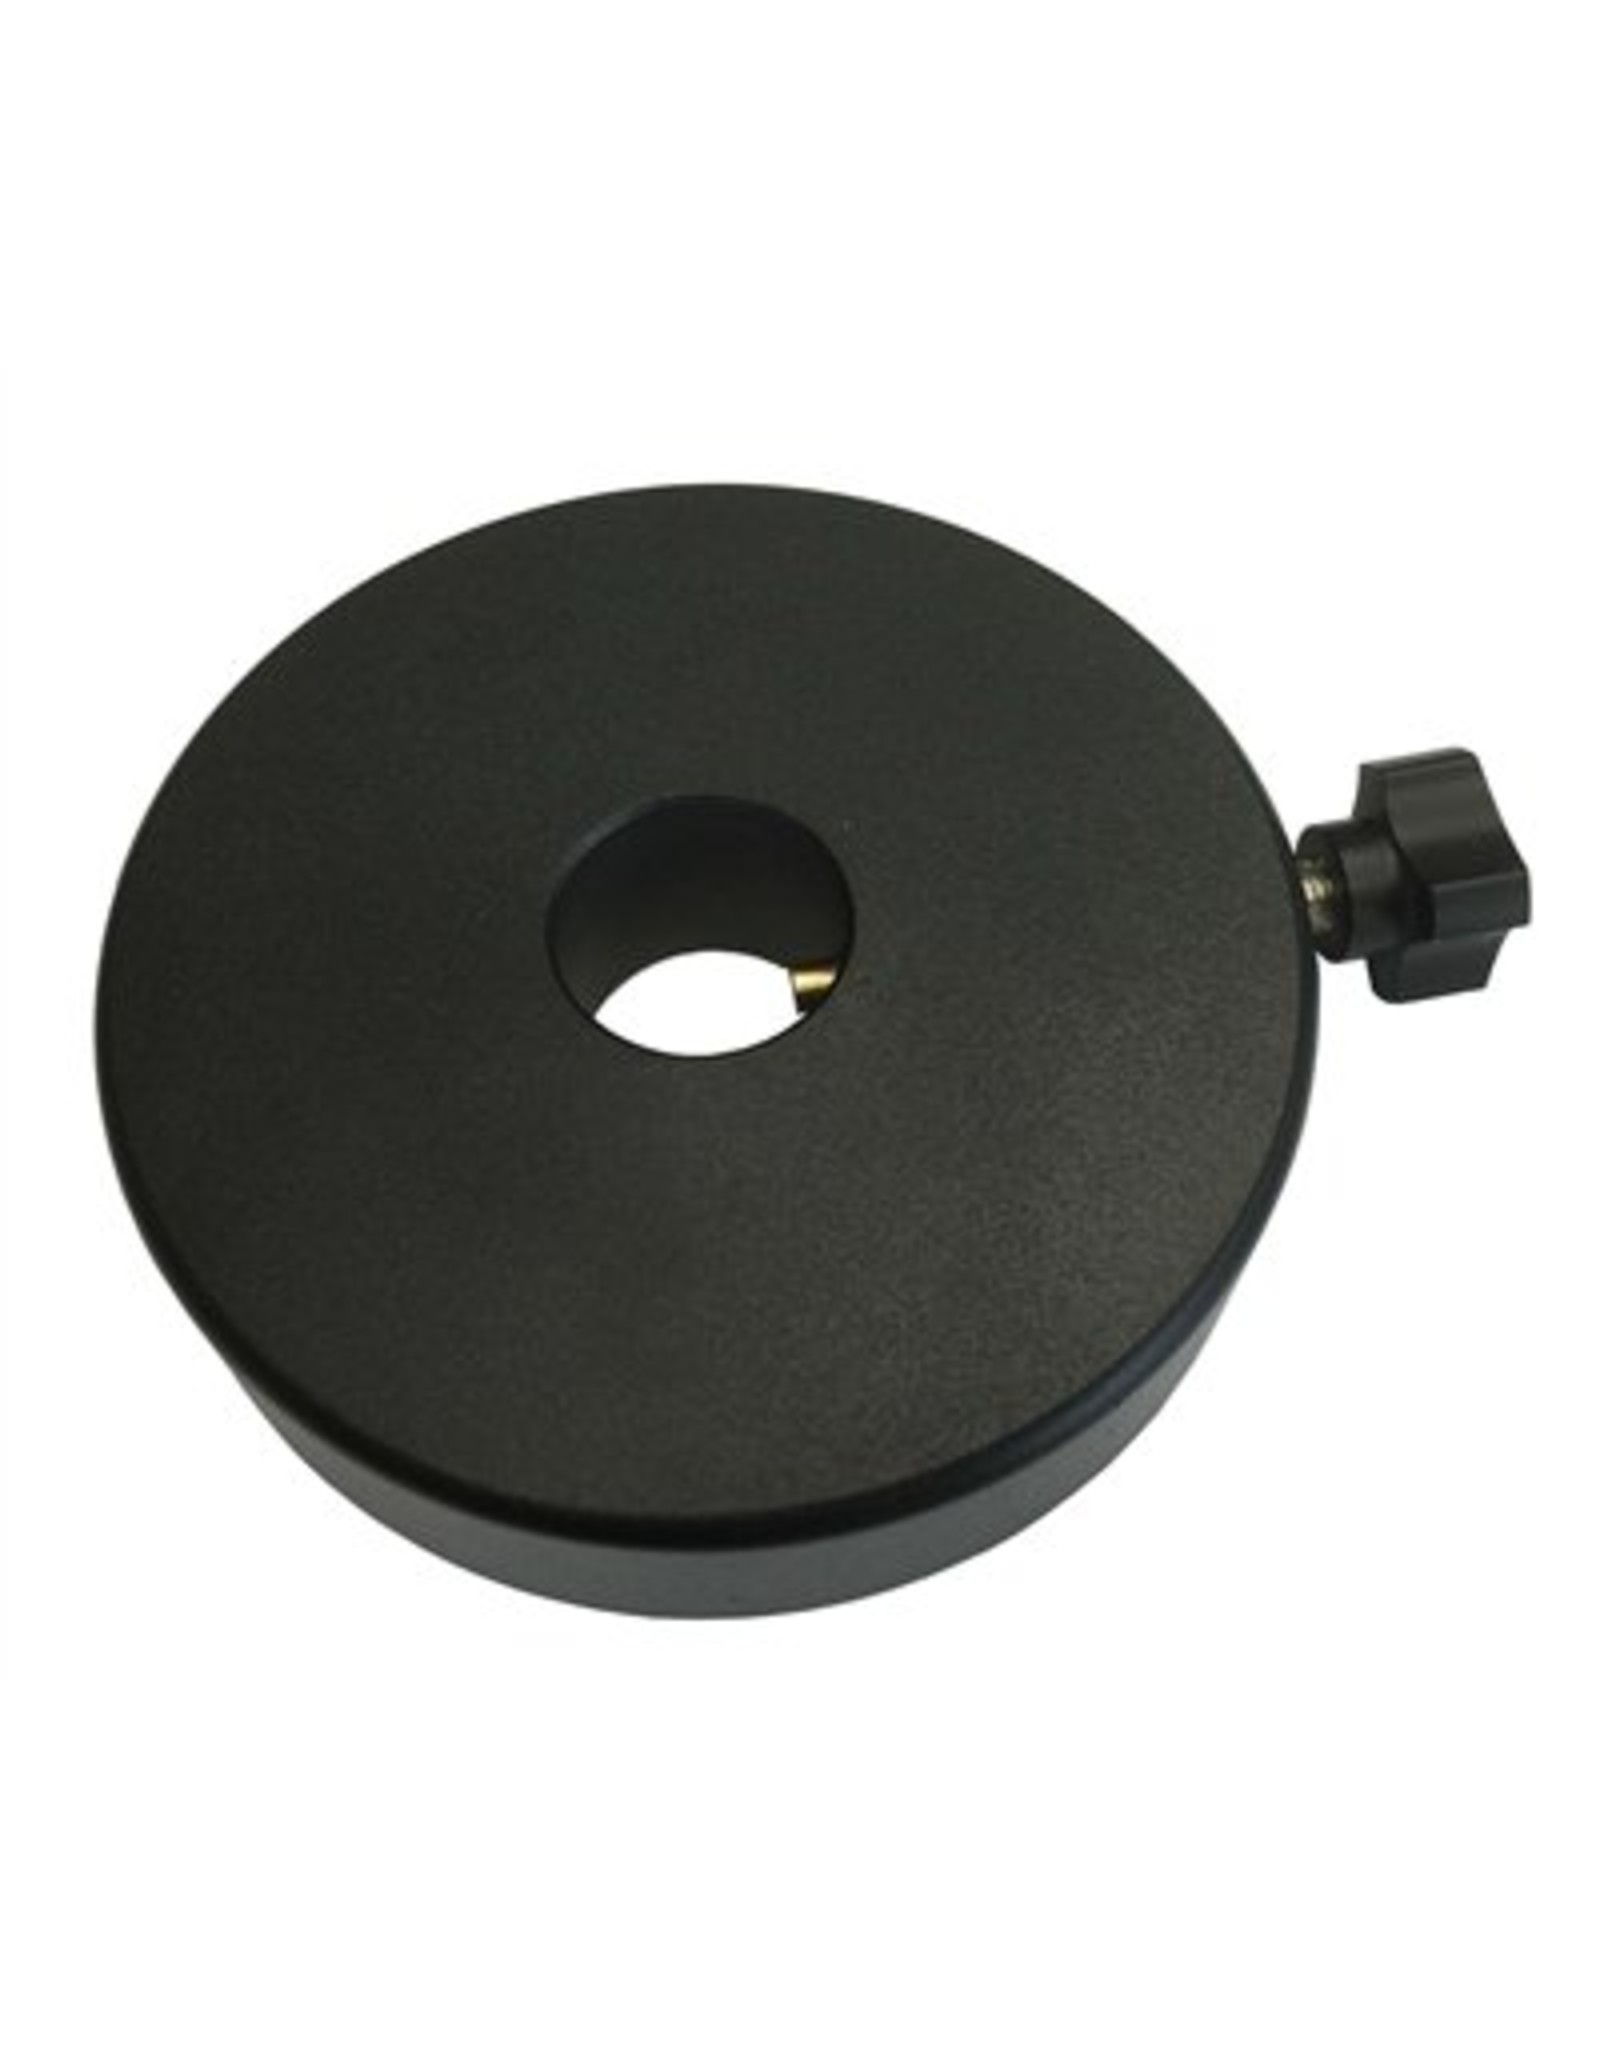 iOptron IOptron 2.5kg (5.5 lb) Counterweight for CEM60 and IEQ45 or any Mount with 28mm Diameter Shaft